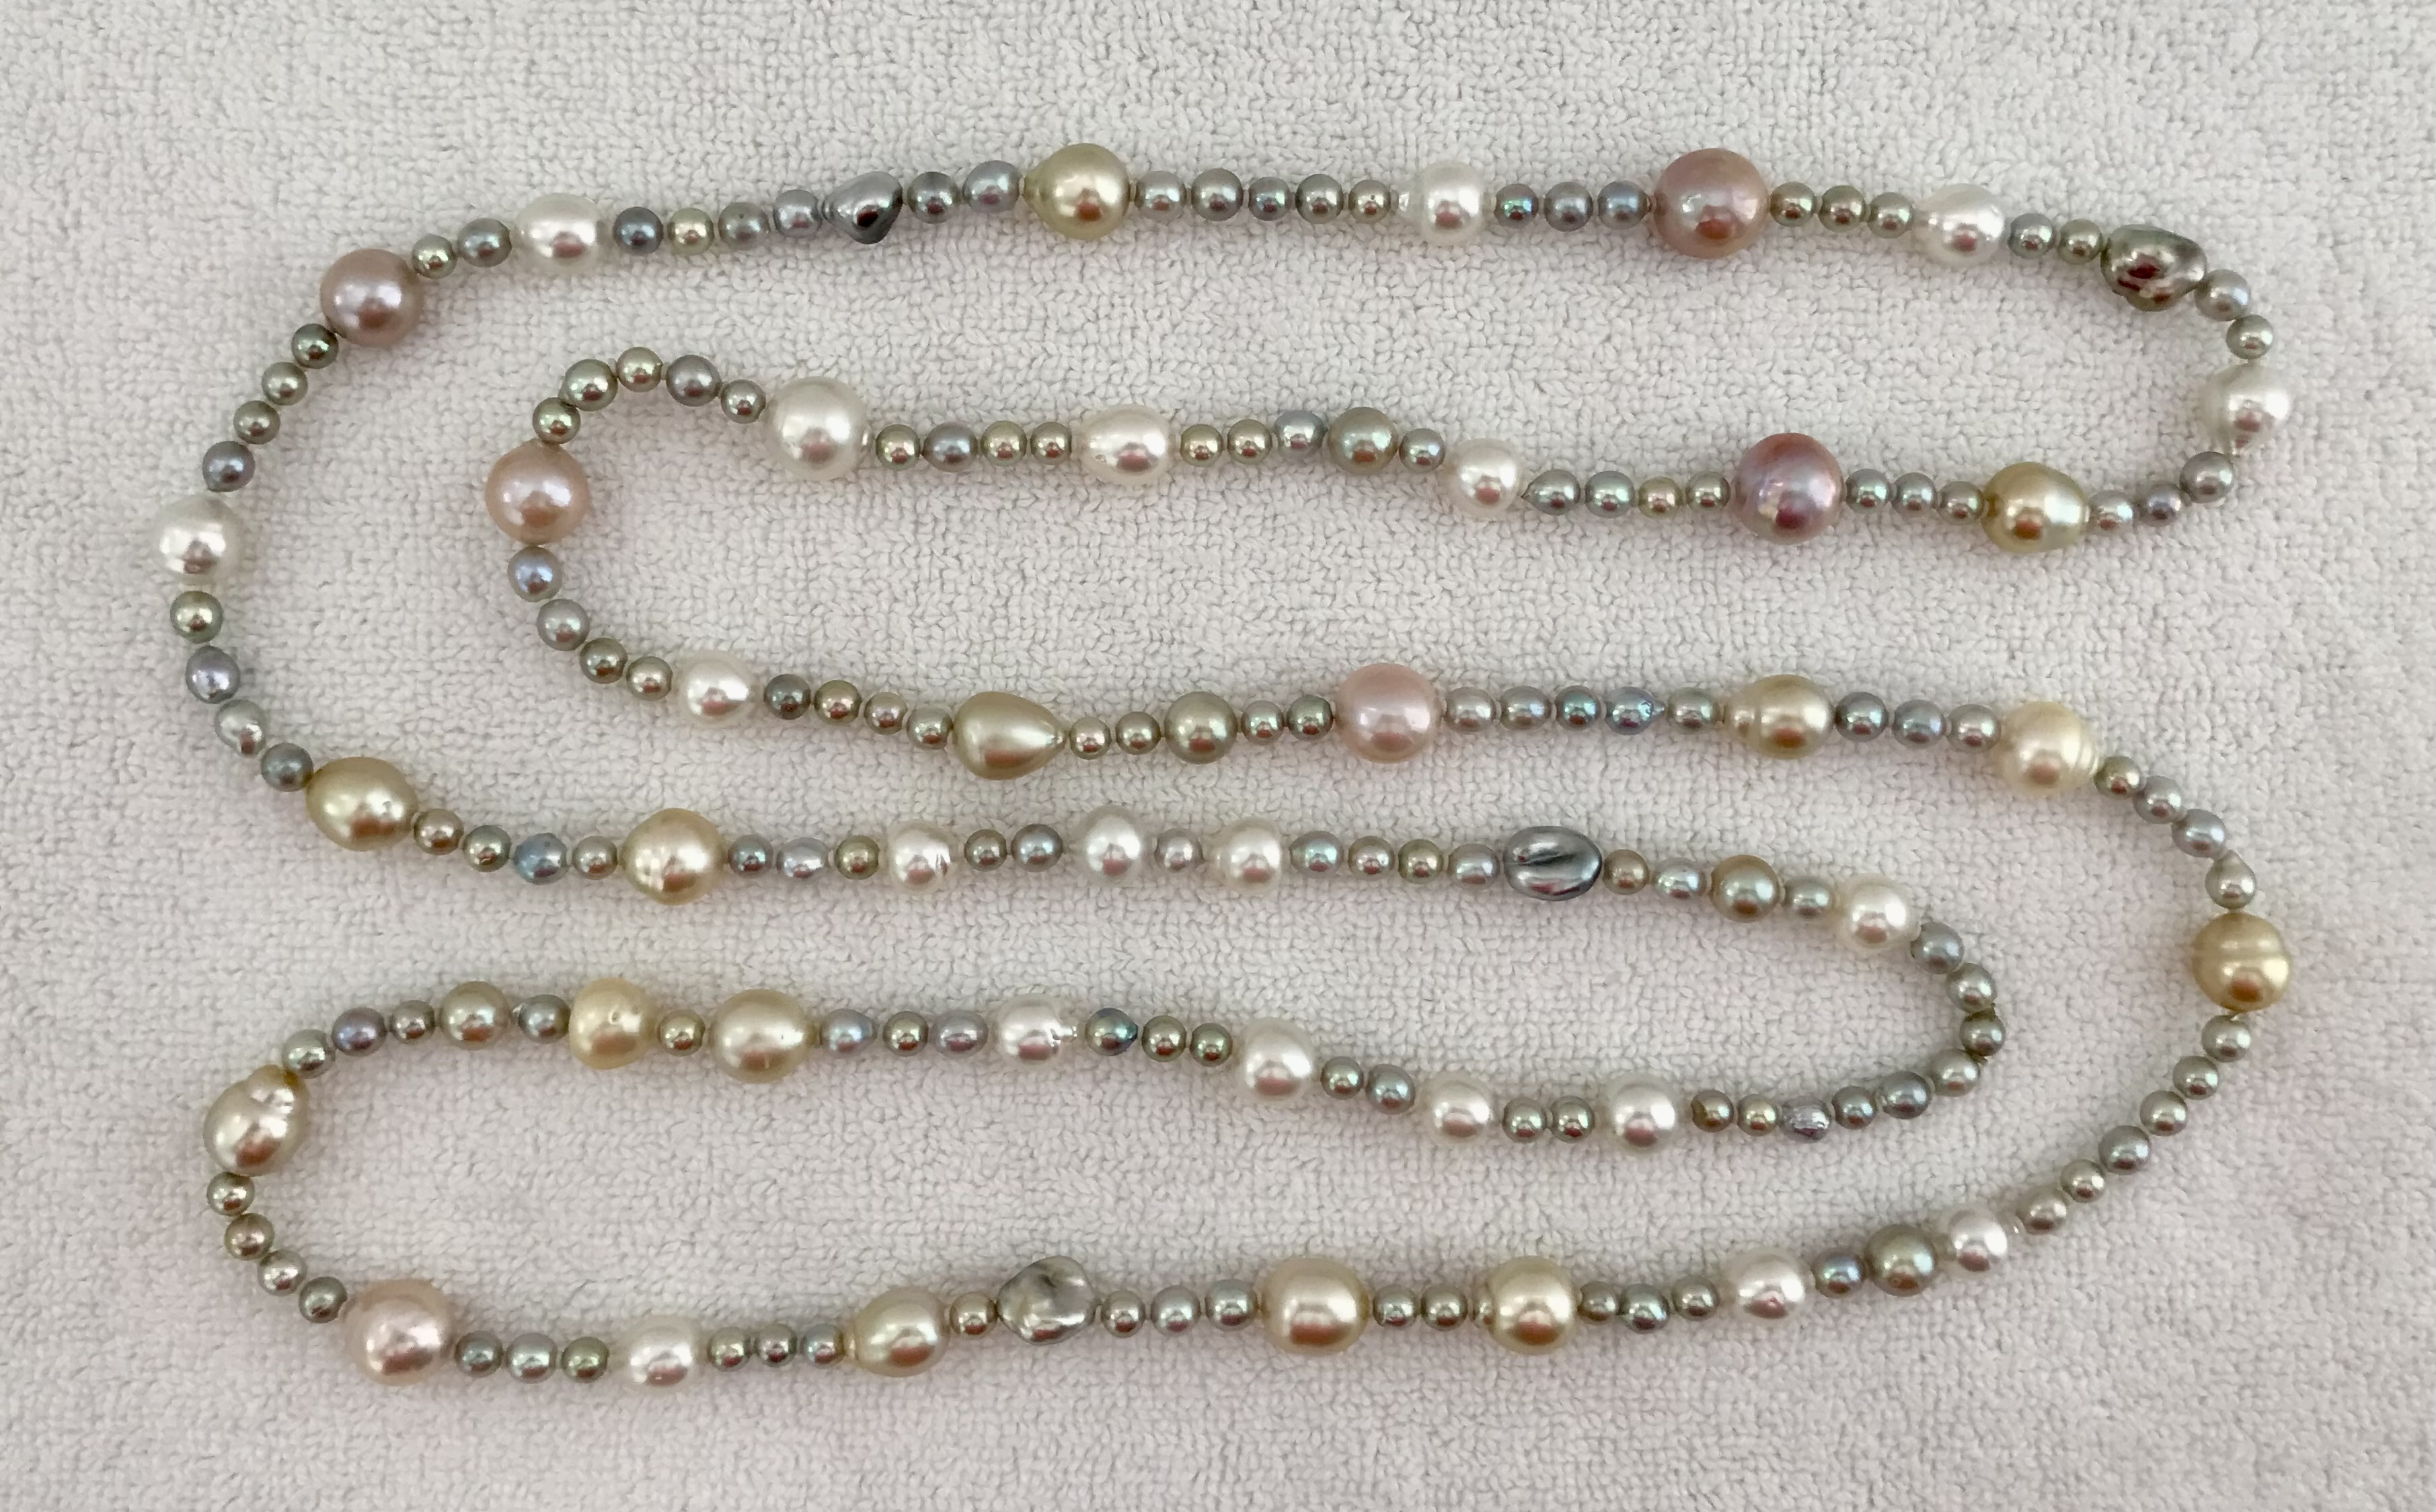 Everything Bagel rope: The large round mauve pearls are smooth Kasumi pearls.   The large white and gold pearls are South Sea.   The nuggets are Tahitian keshi from Kamoka.   And all the small pearls are blue and green baroque akoyas.